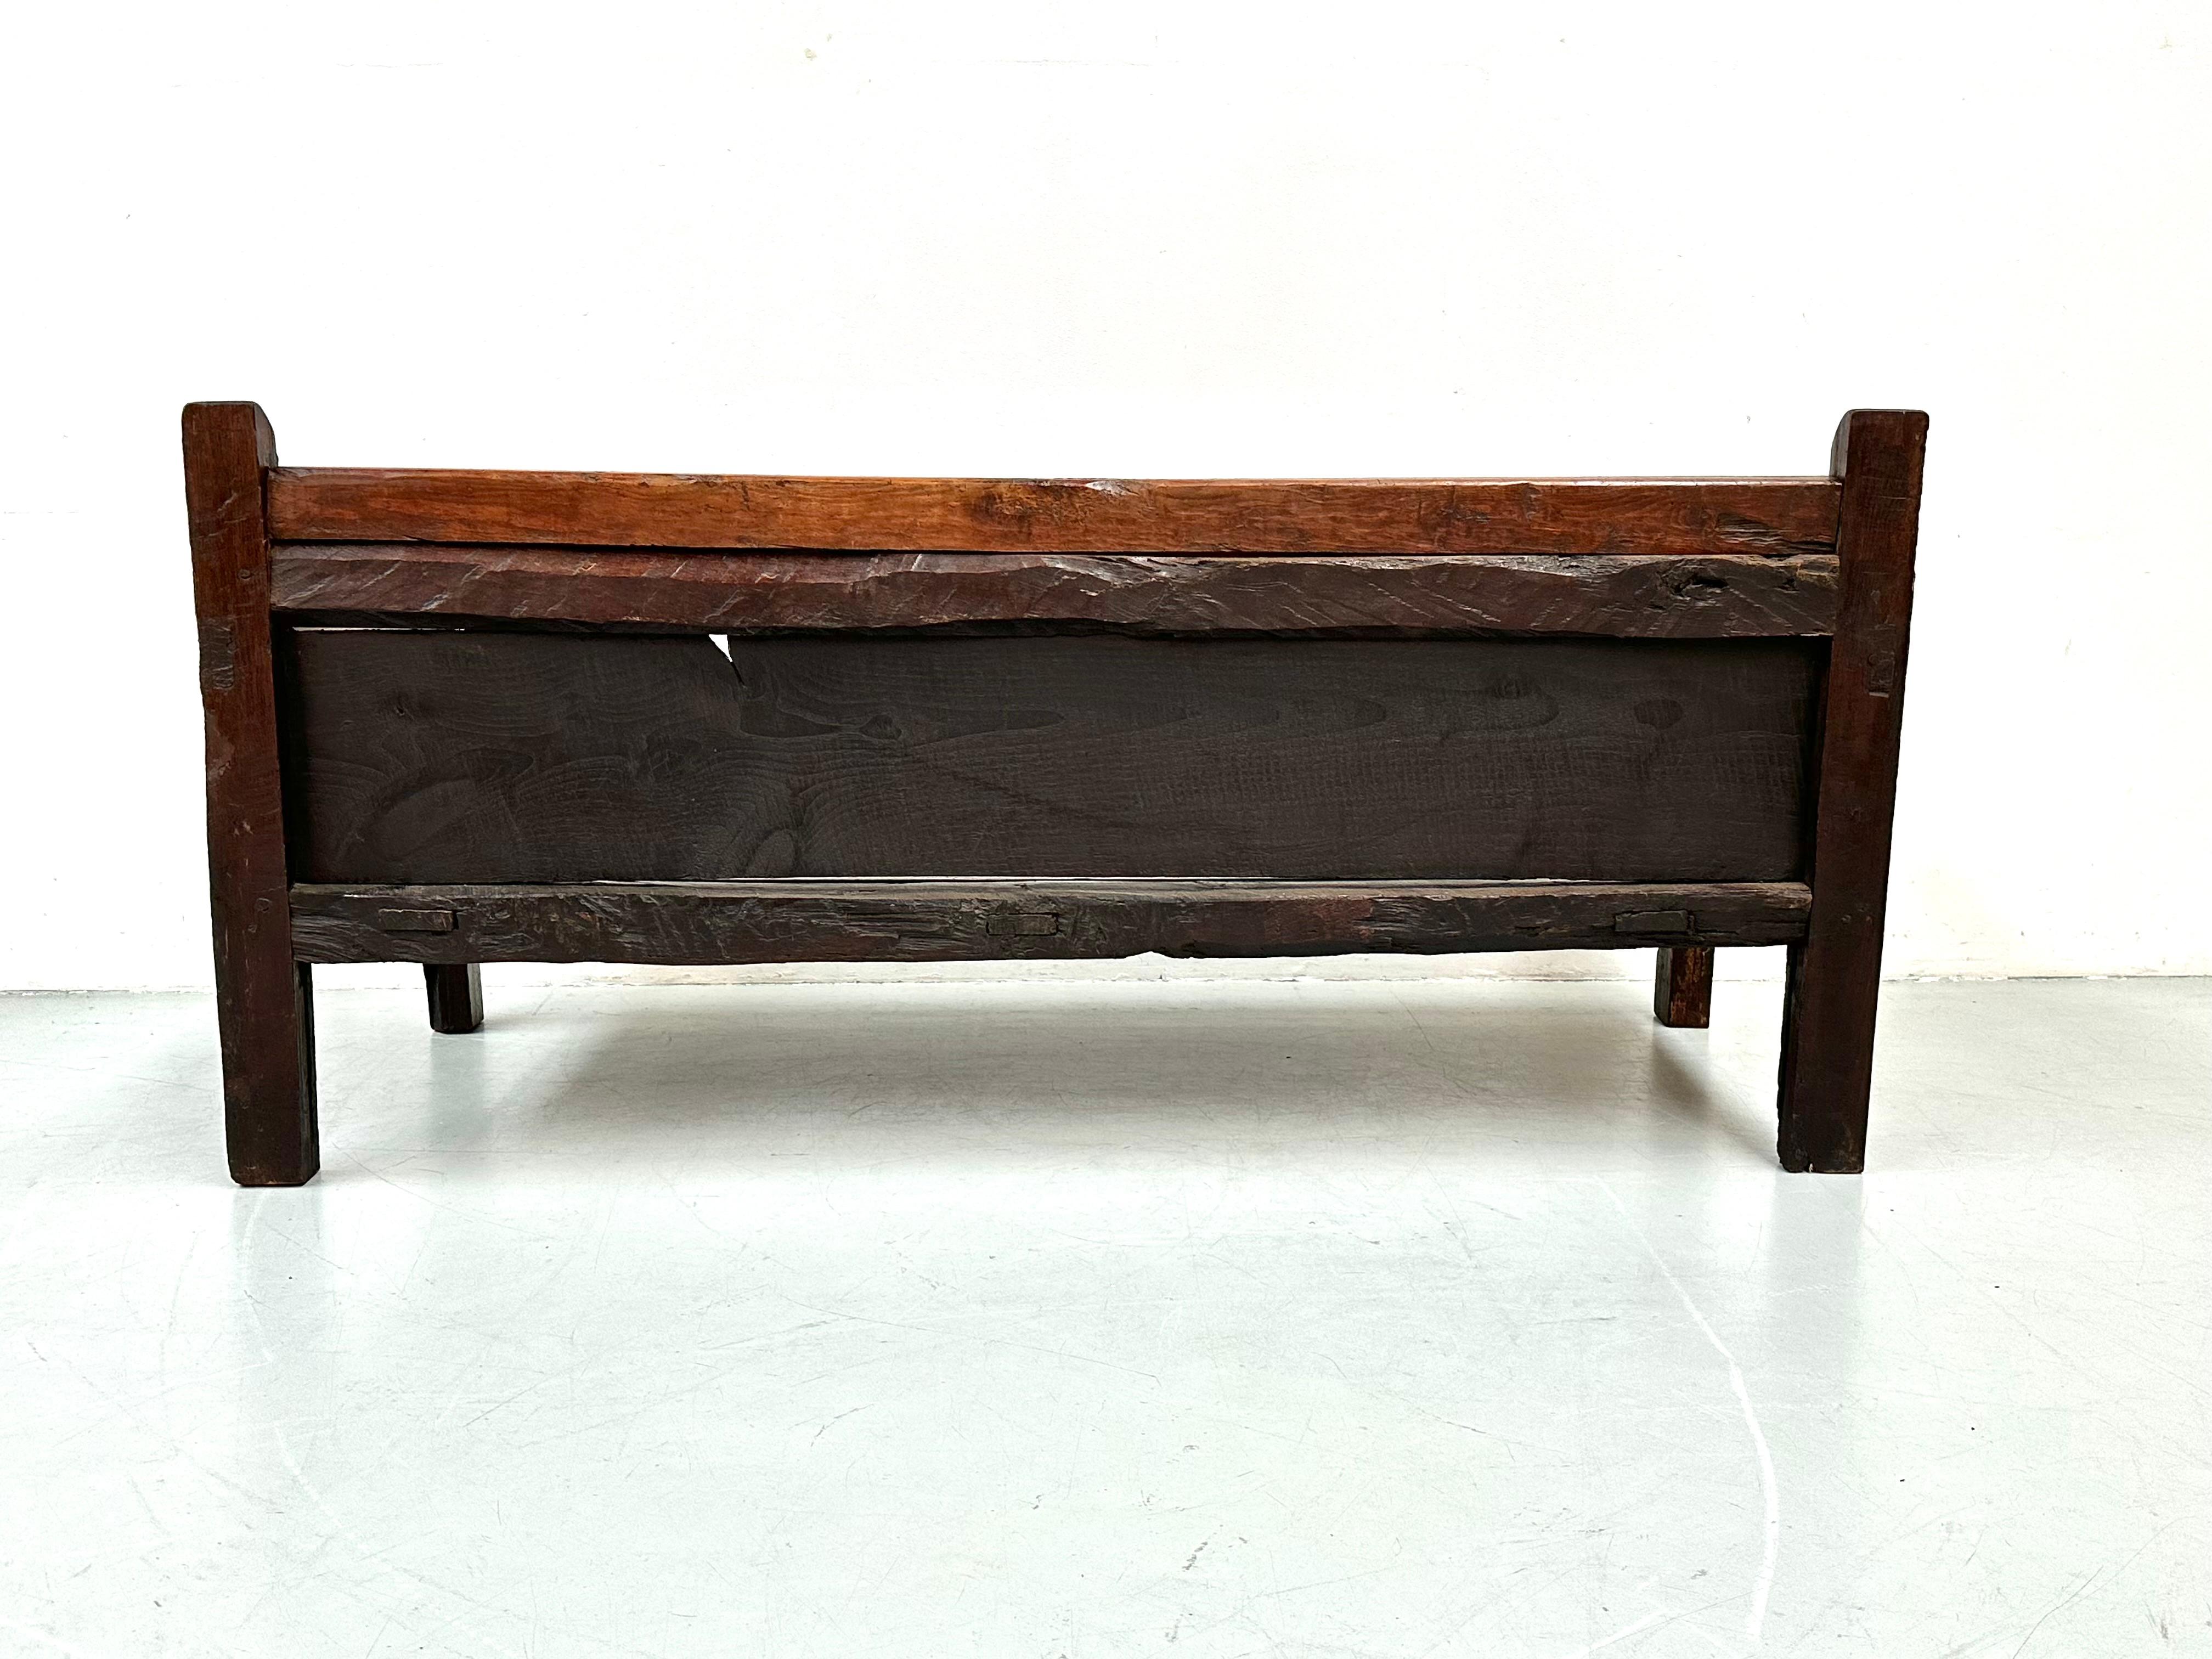 Antique Handmade Minimalistic Spanish Chestnut Wood Bench, Early 19th Century For Sale 14